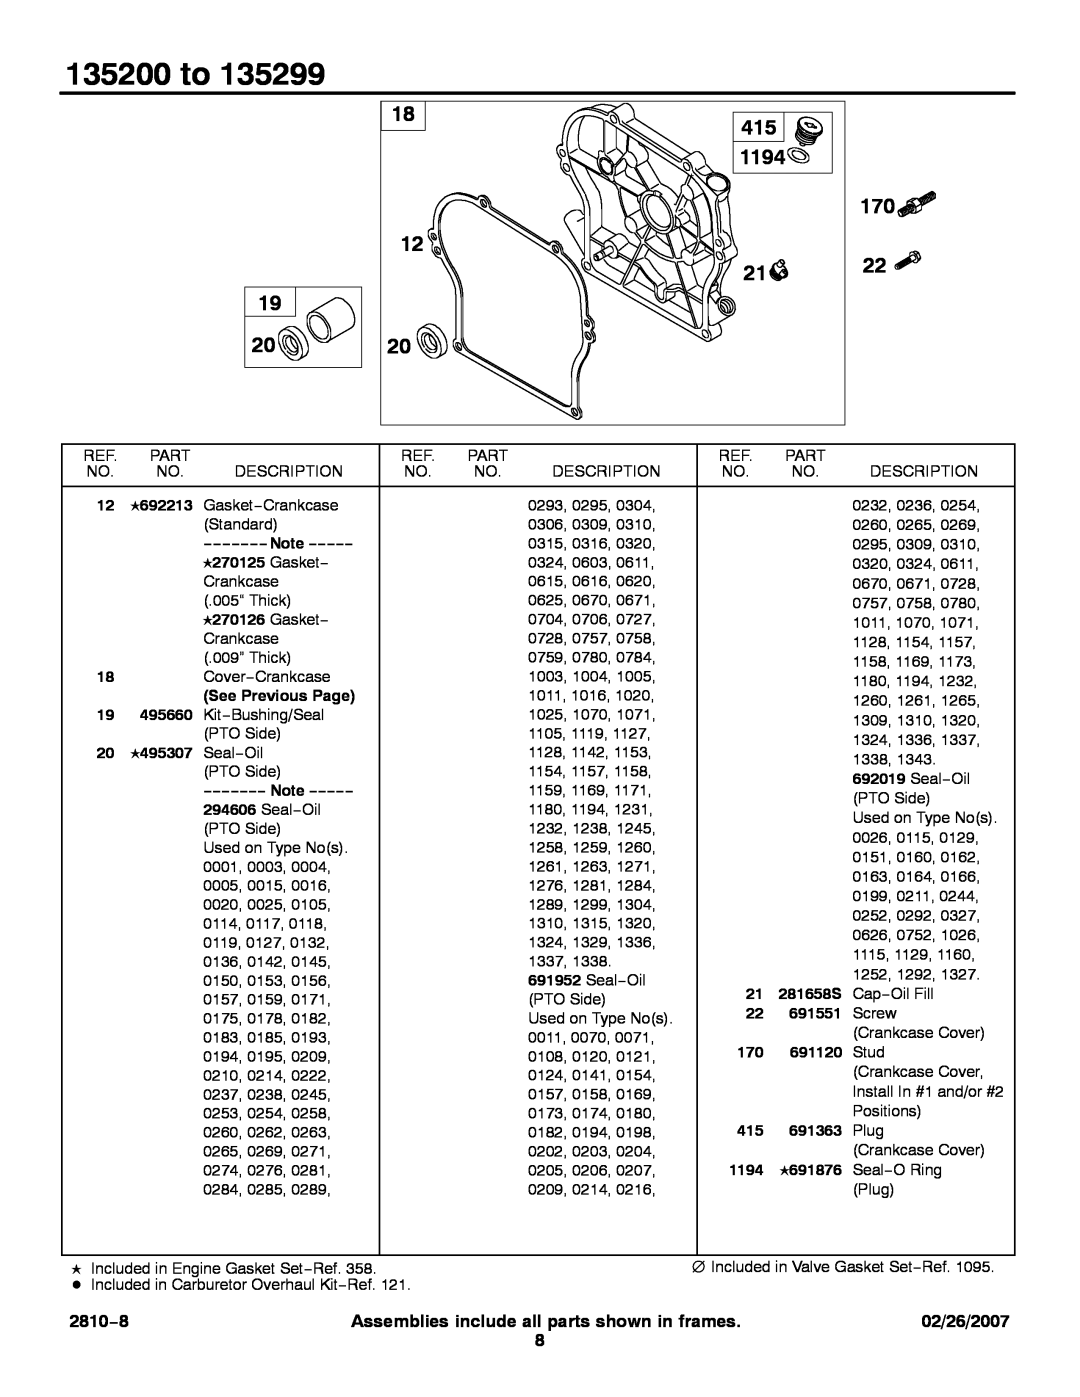 Briggs & Stratton service manual 135200 to, 1194, 2810−8, Assemblies include all parts shown in frames, 02/26/2007 